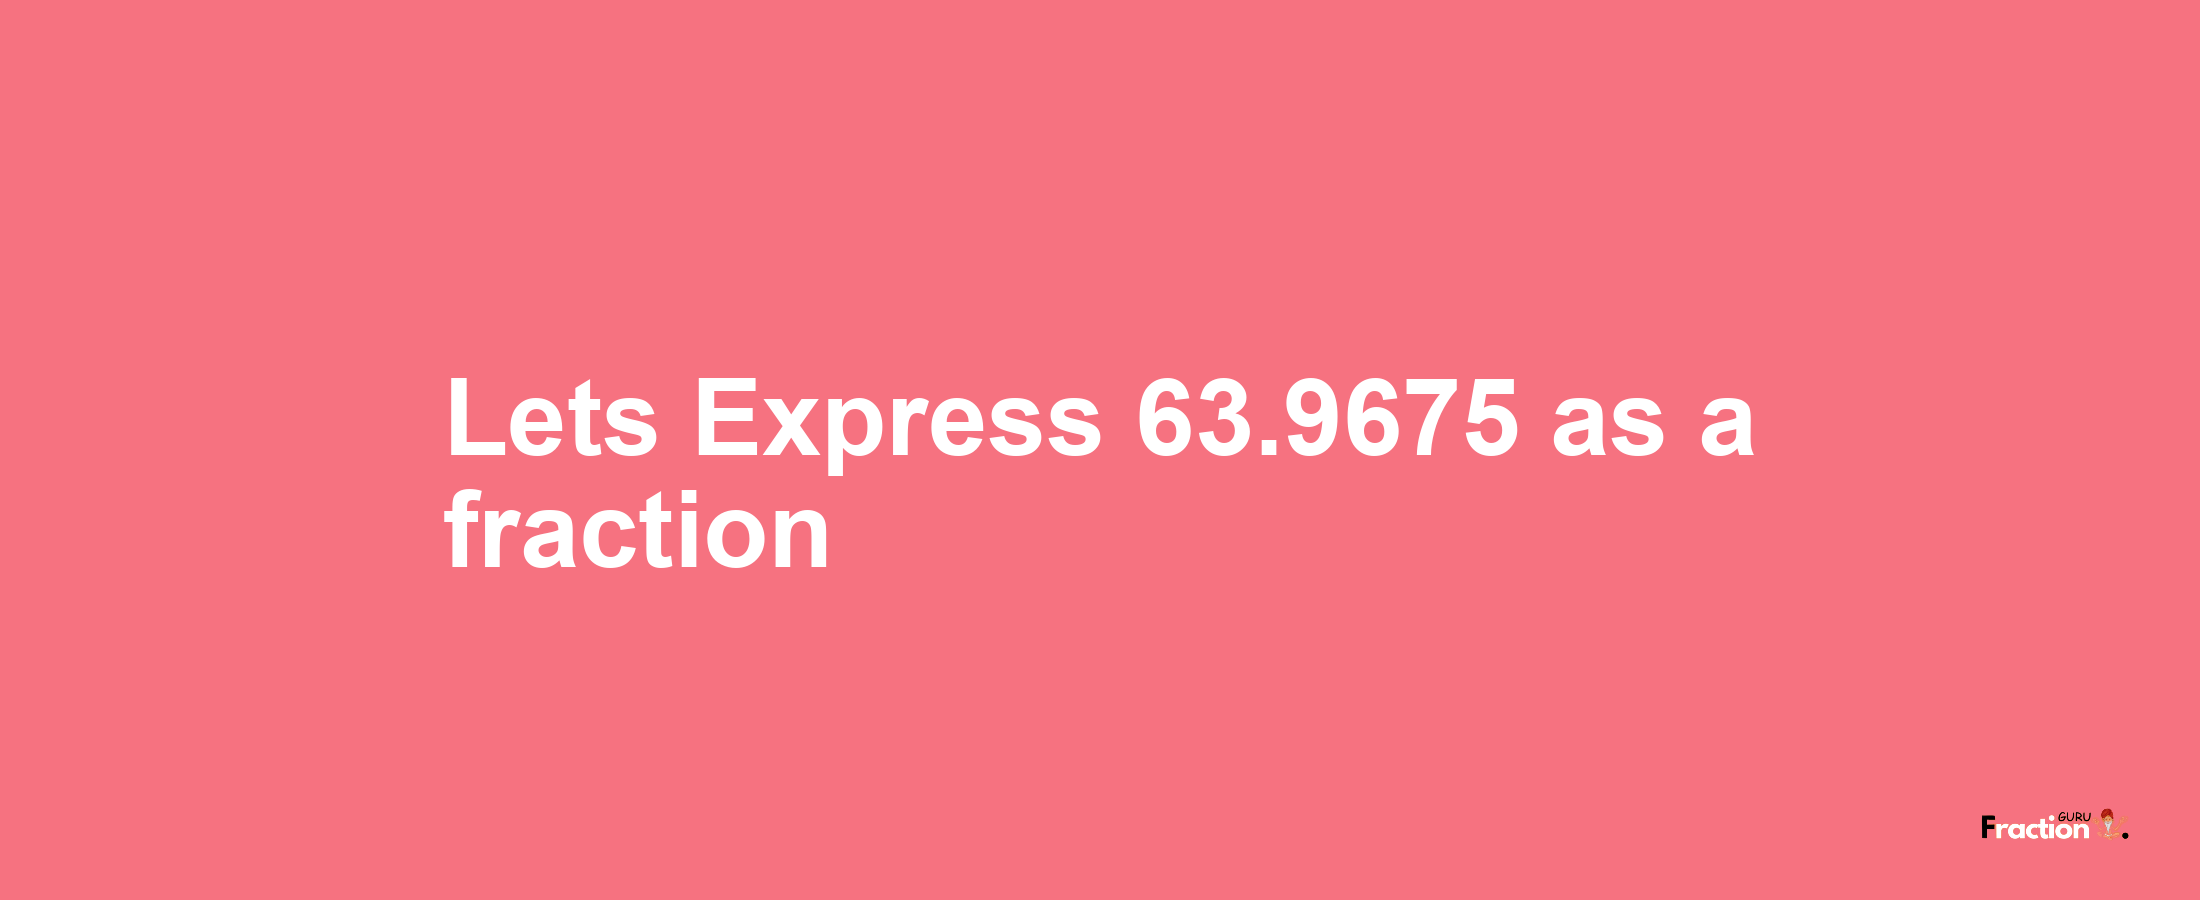 Lets Express 63.9675 as afraction